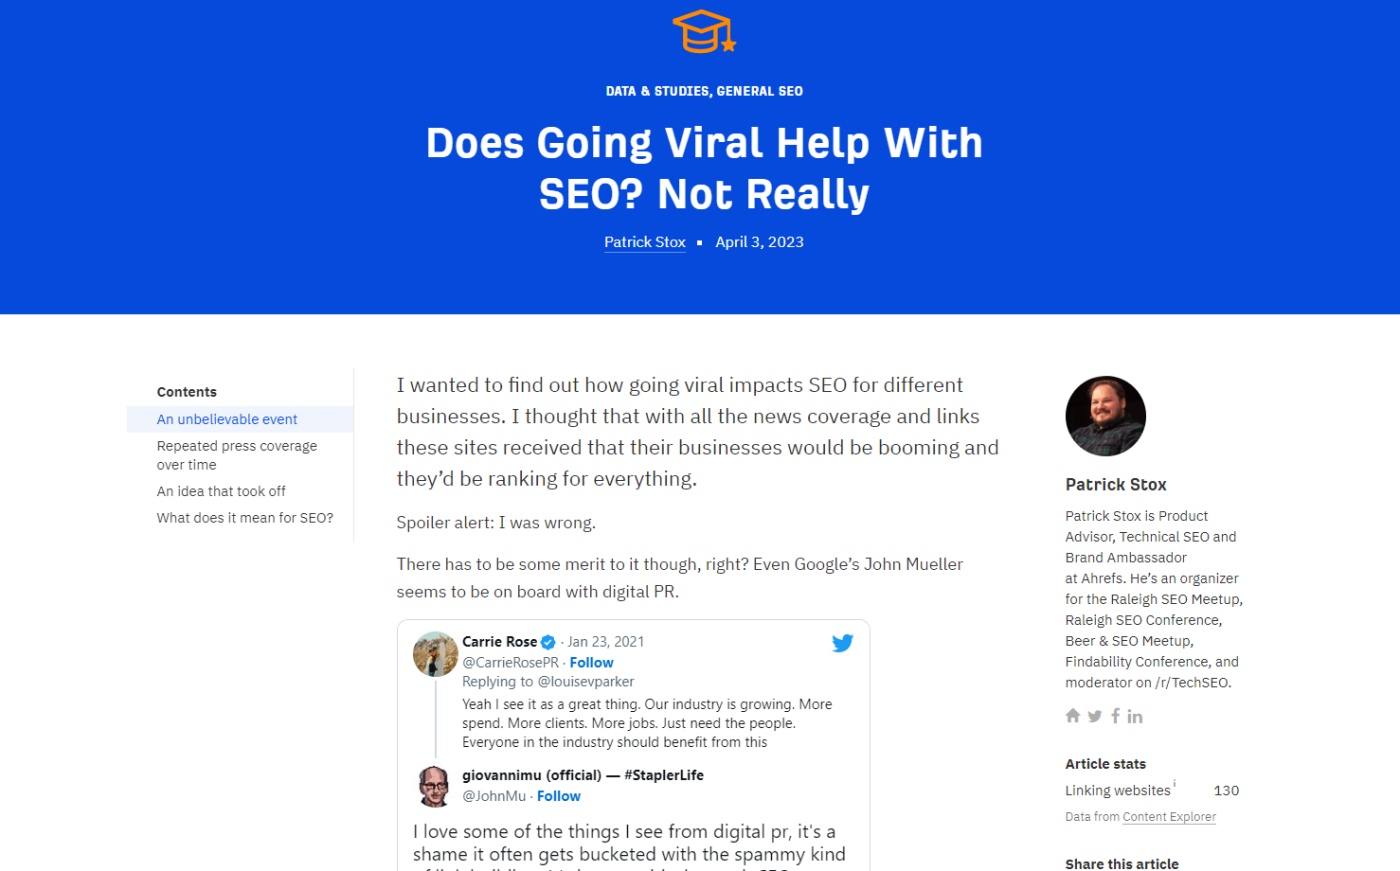 The article described above from Ahrefs